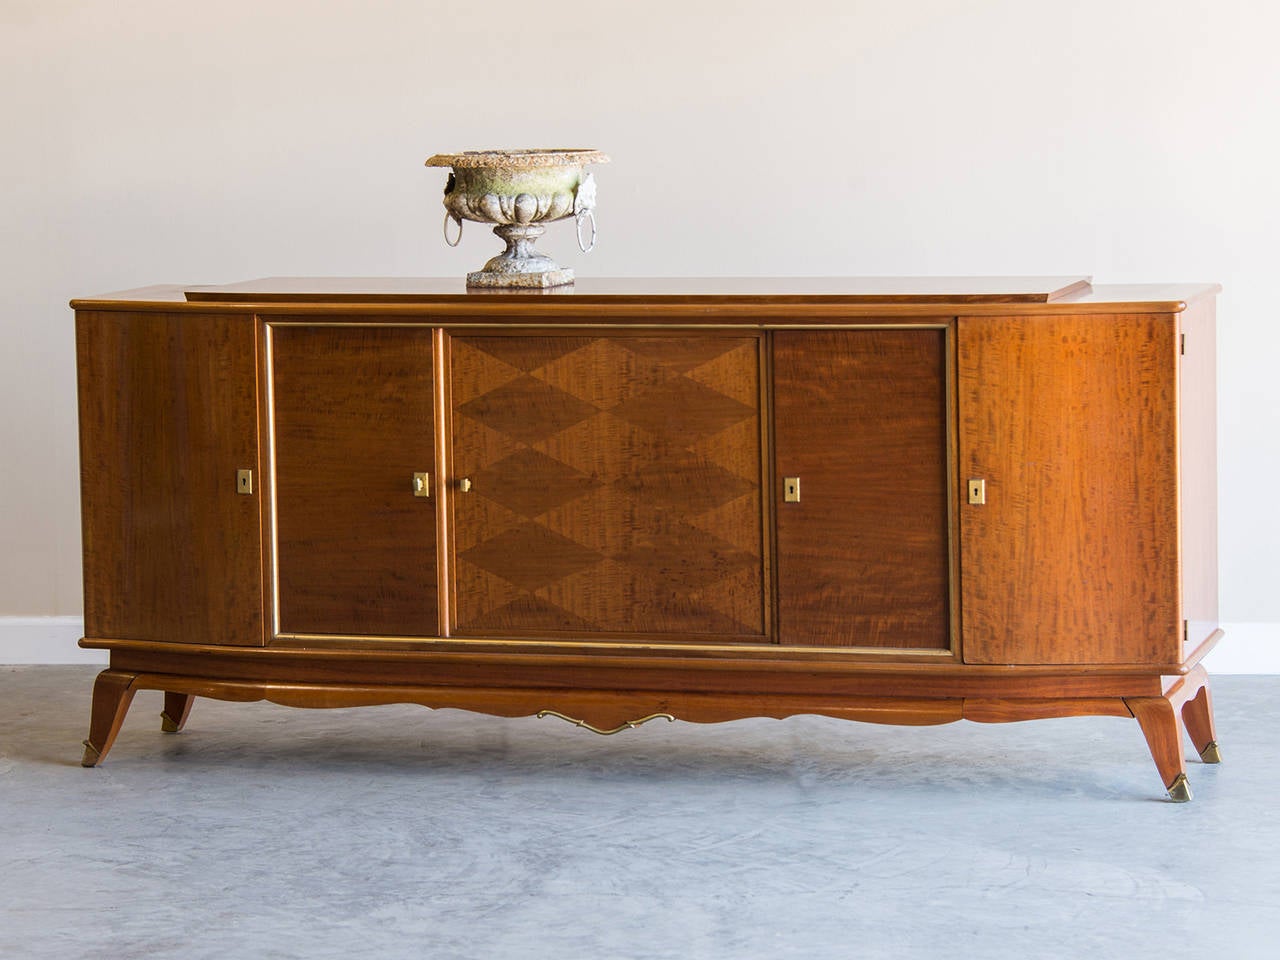 Receive our new selections direct from 1stdibs by email each week. Please click Follow Dealer below and see them first!

The highly decorative appearance of this vintage French buffet circa 1940 with its use of figured timber, harlequin pattern